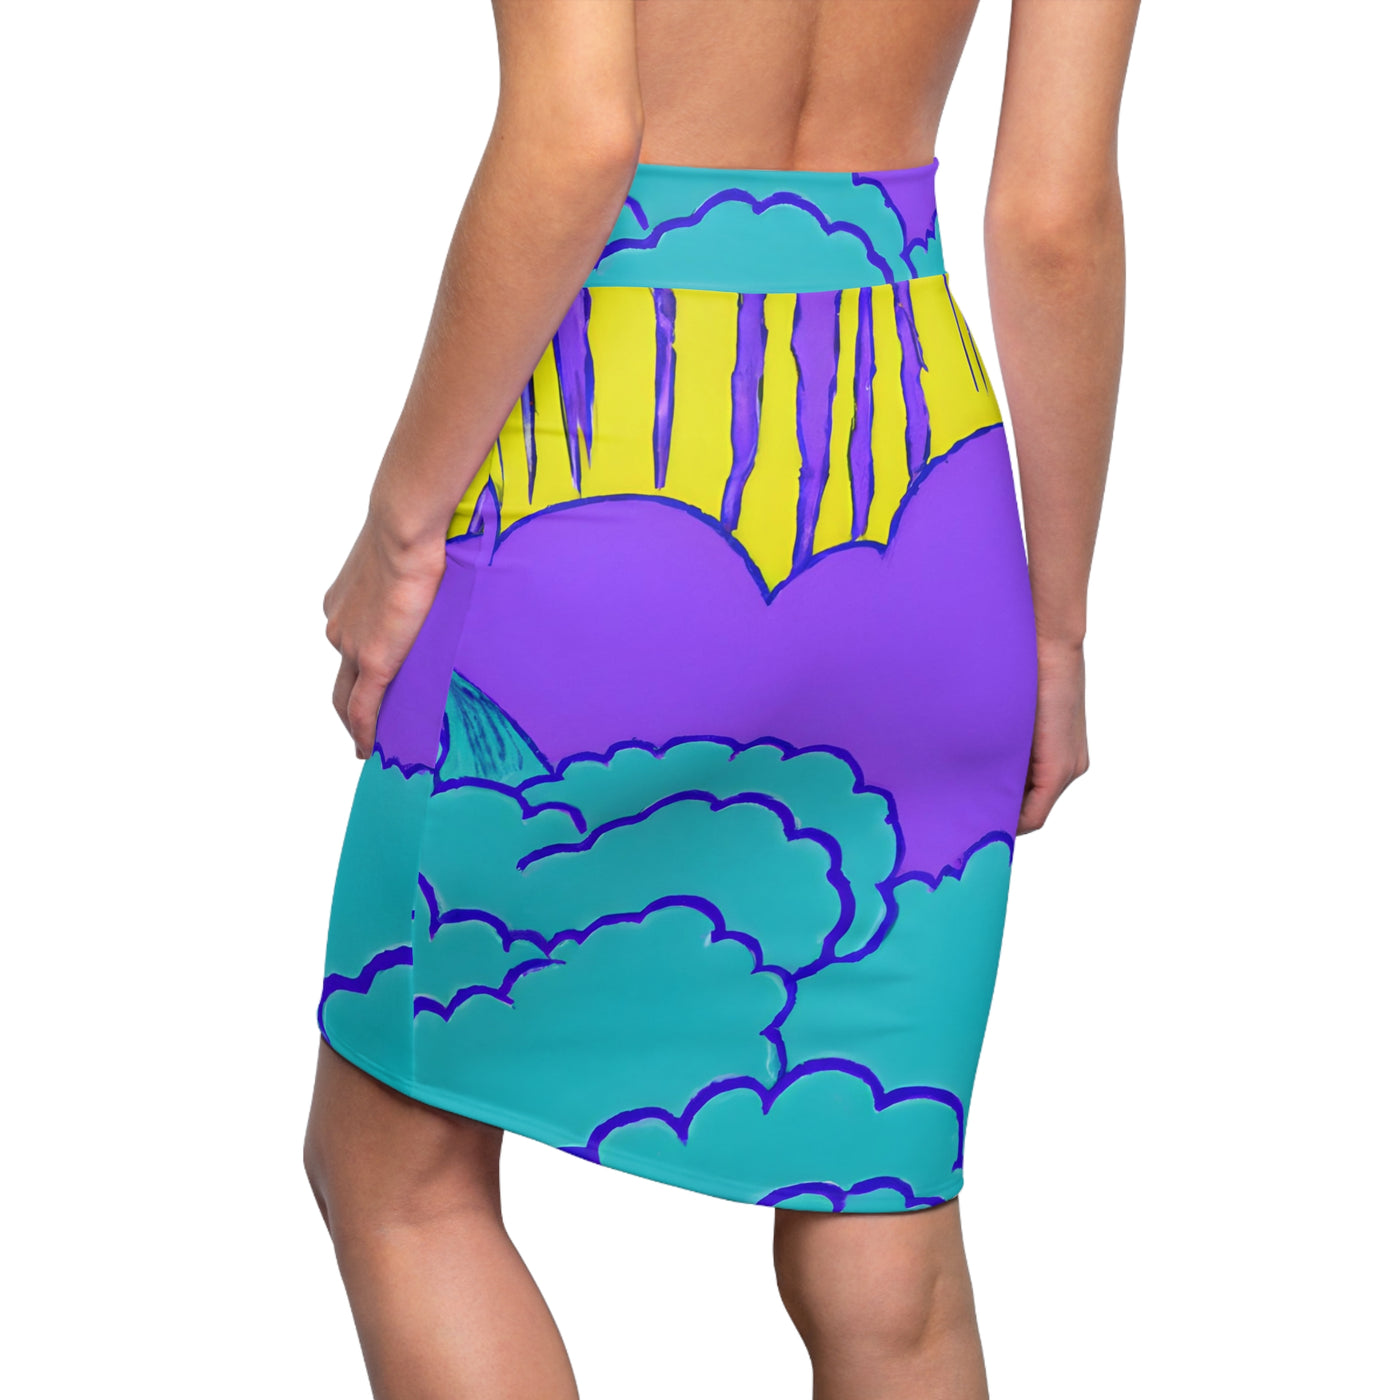 "Amazing Clouds of Colorful Joy!" Women's Pencil Skirt